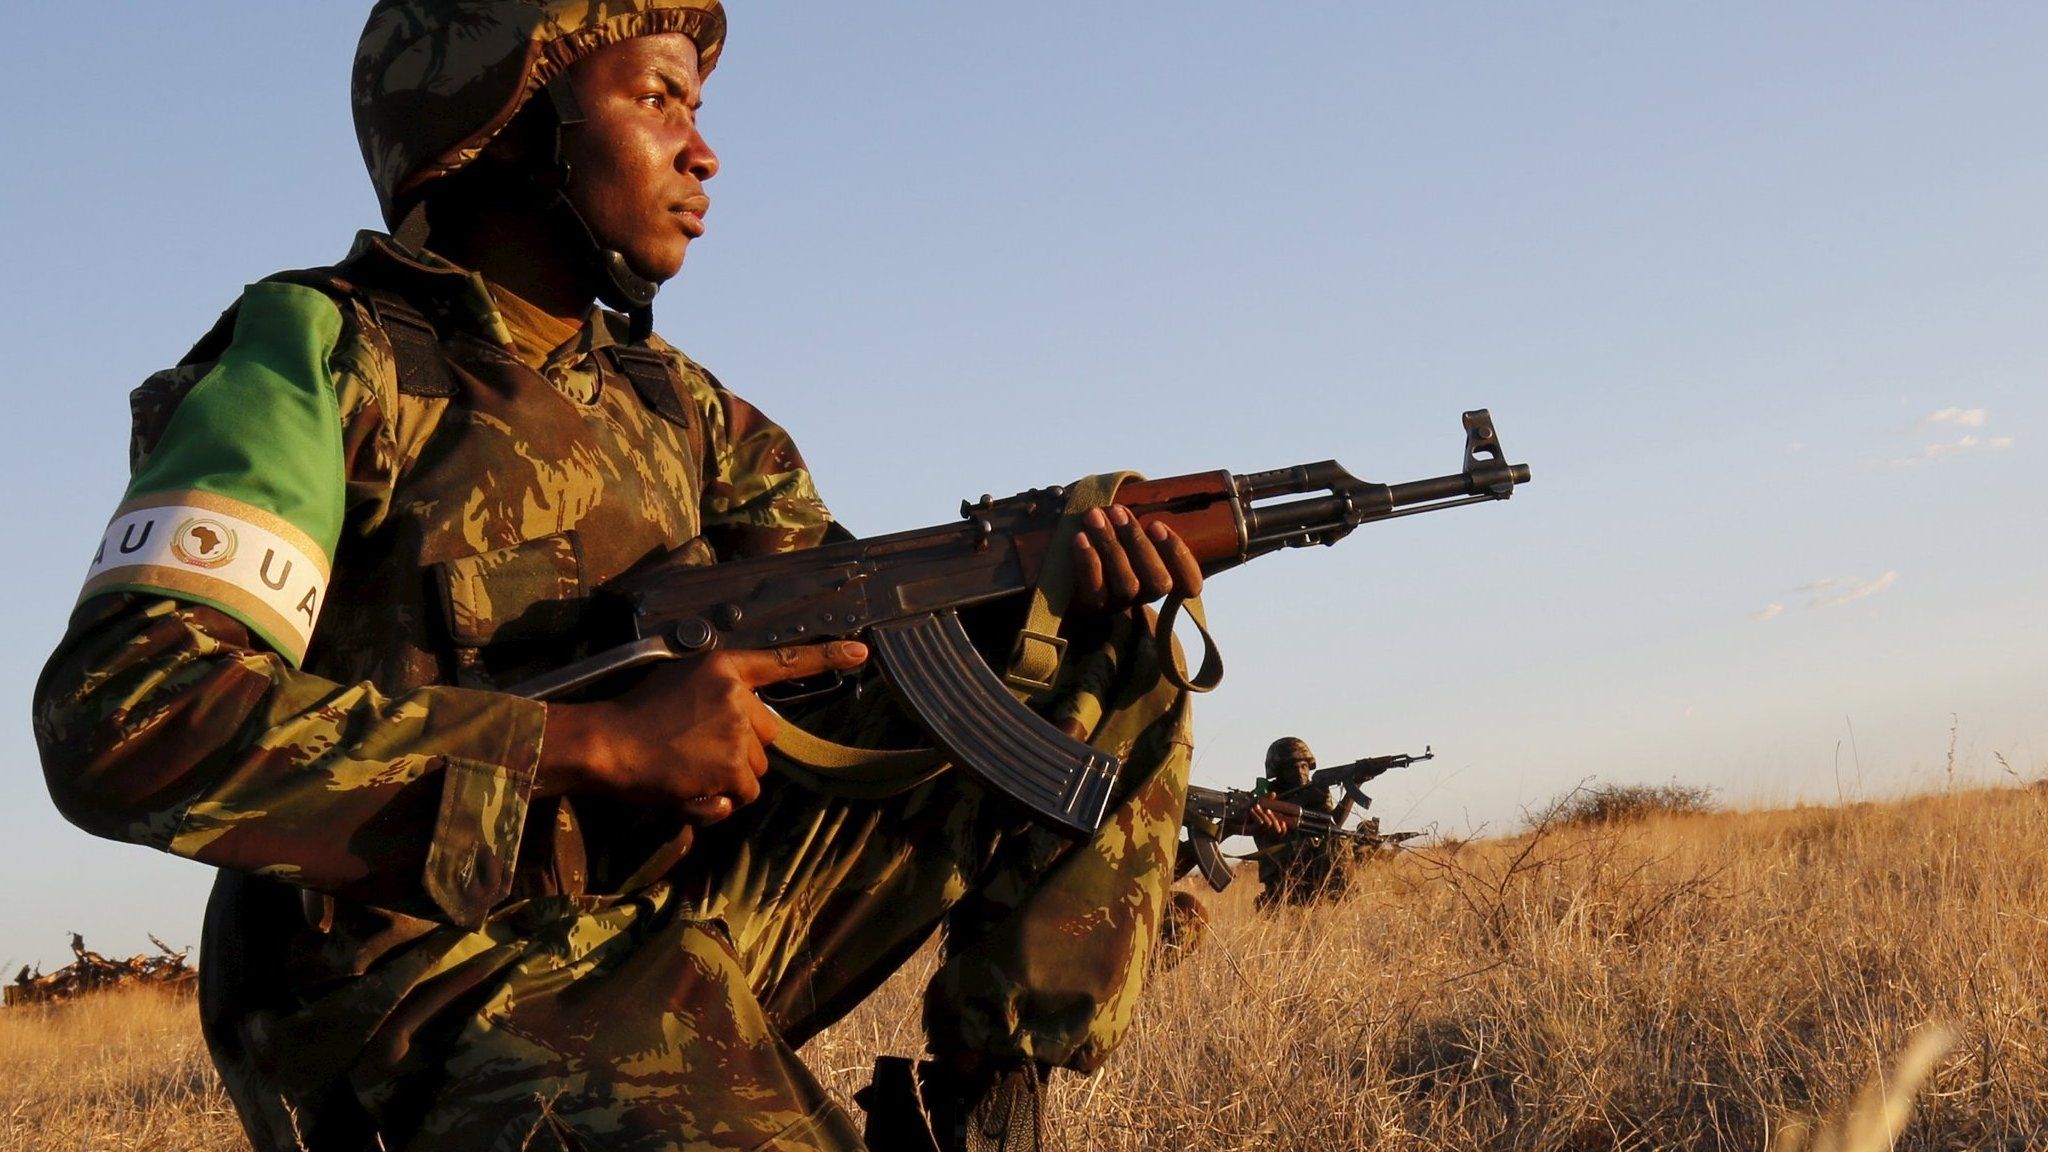 Mozambican soldiers taking part the African Standby Force exercises in South Africa - October 2015